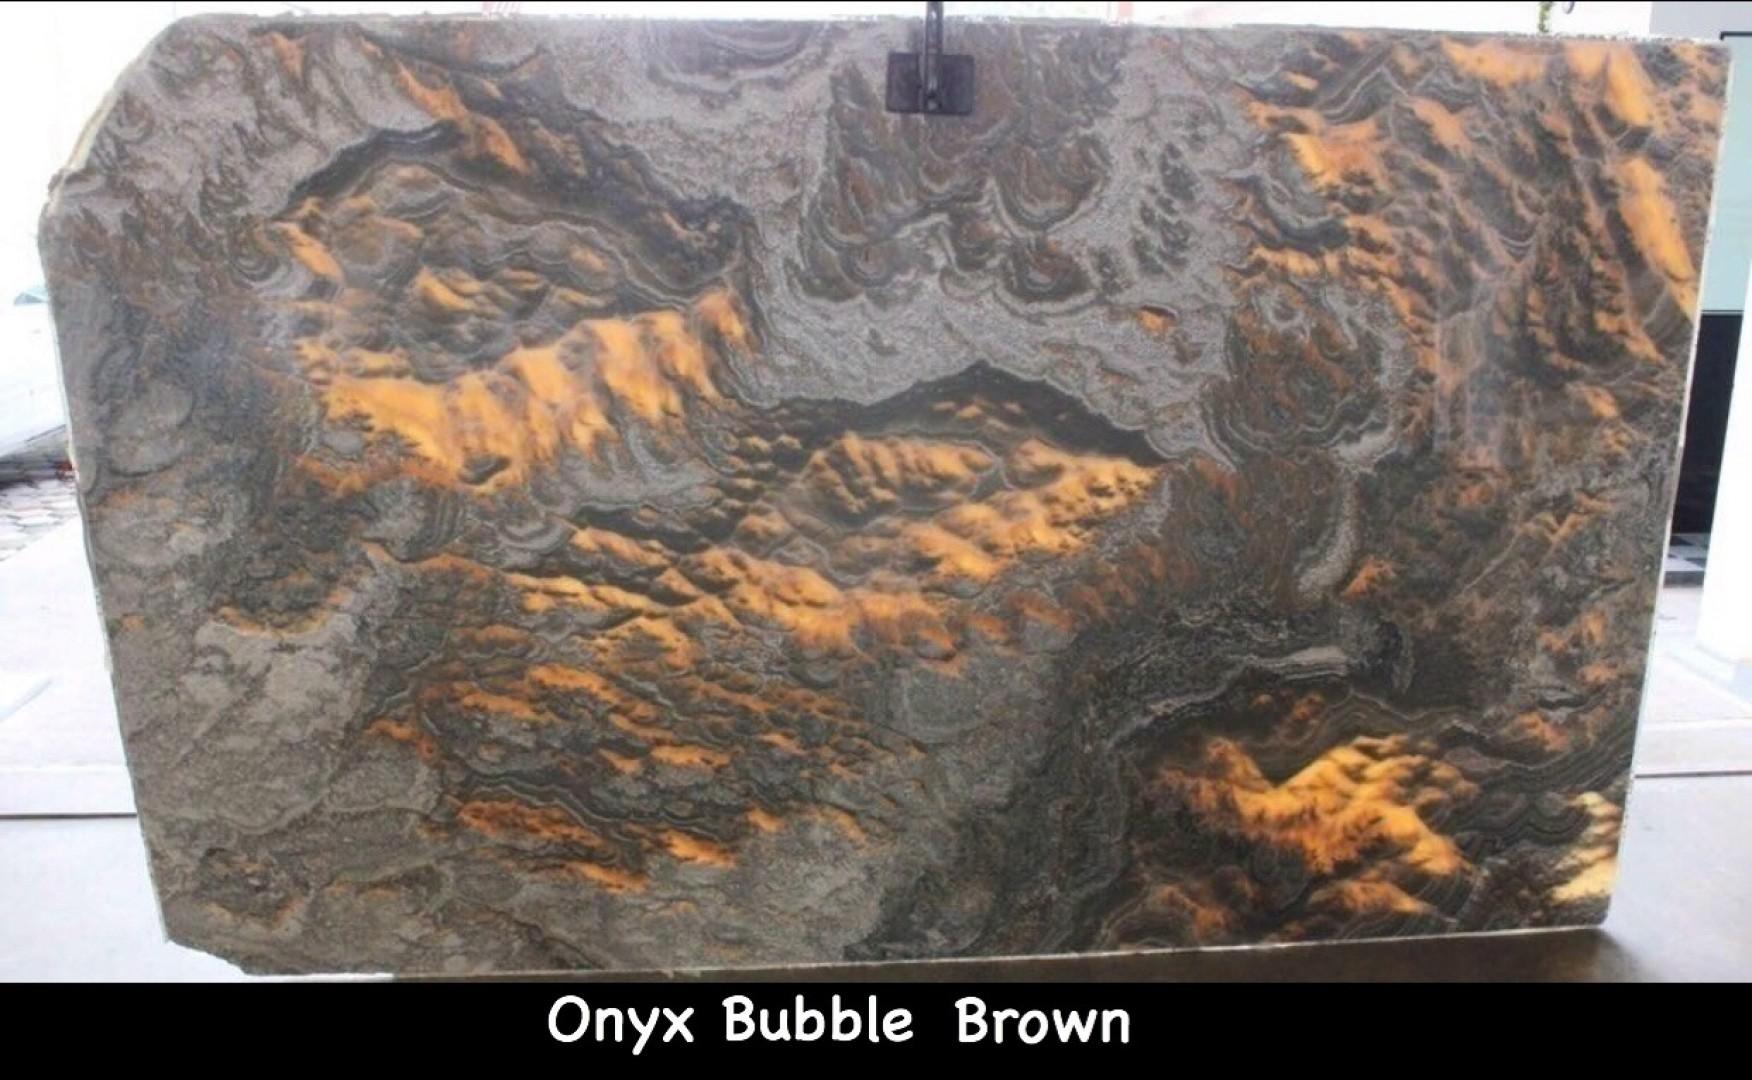 Onyx Bubble Brown from JSP